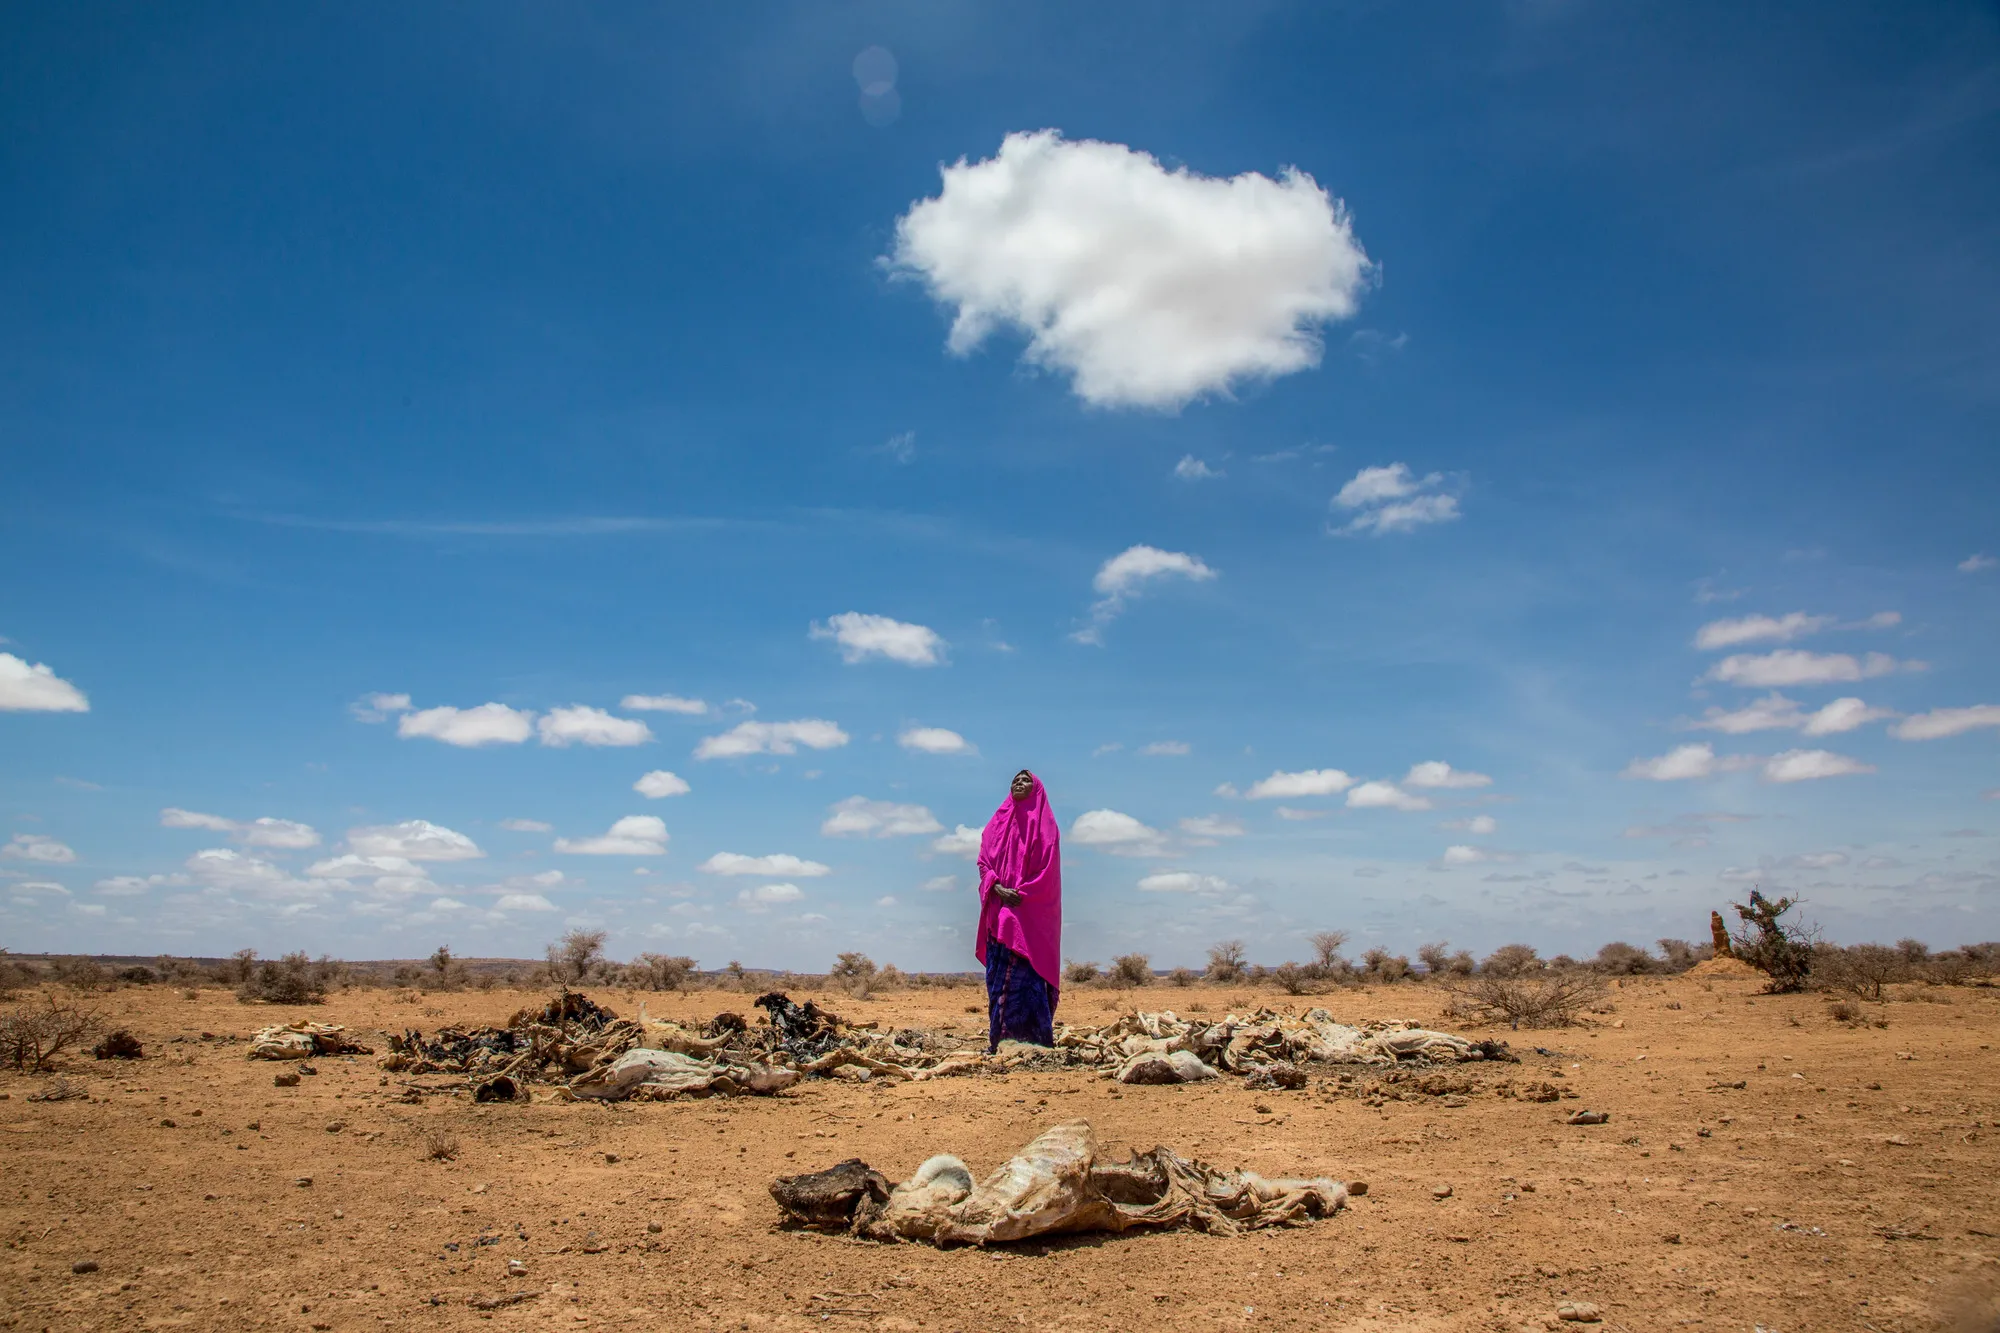 A woman stands in a dry field.